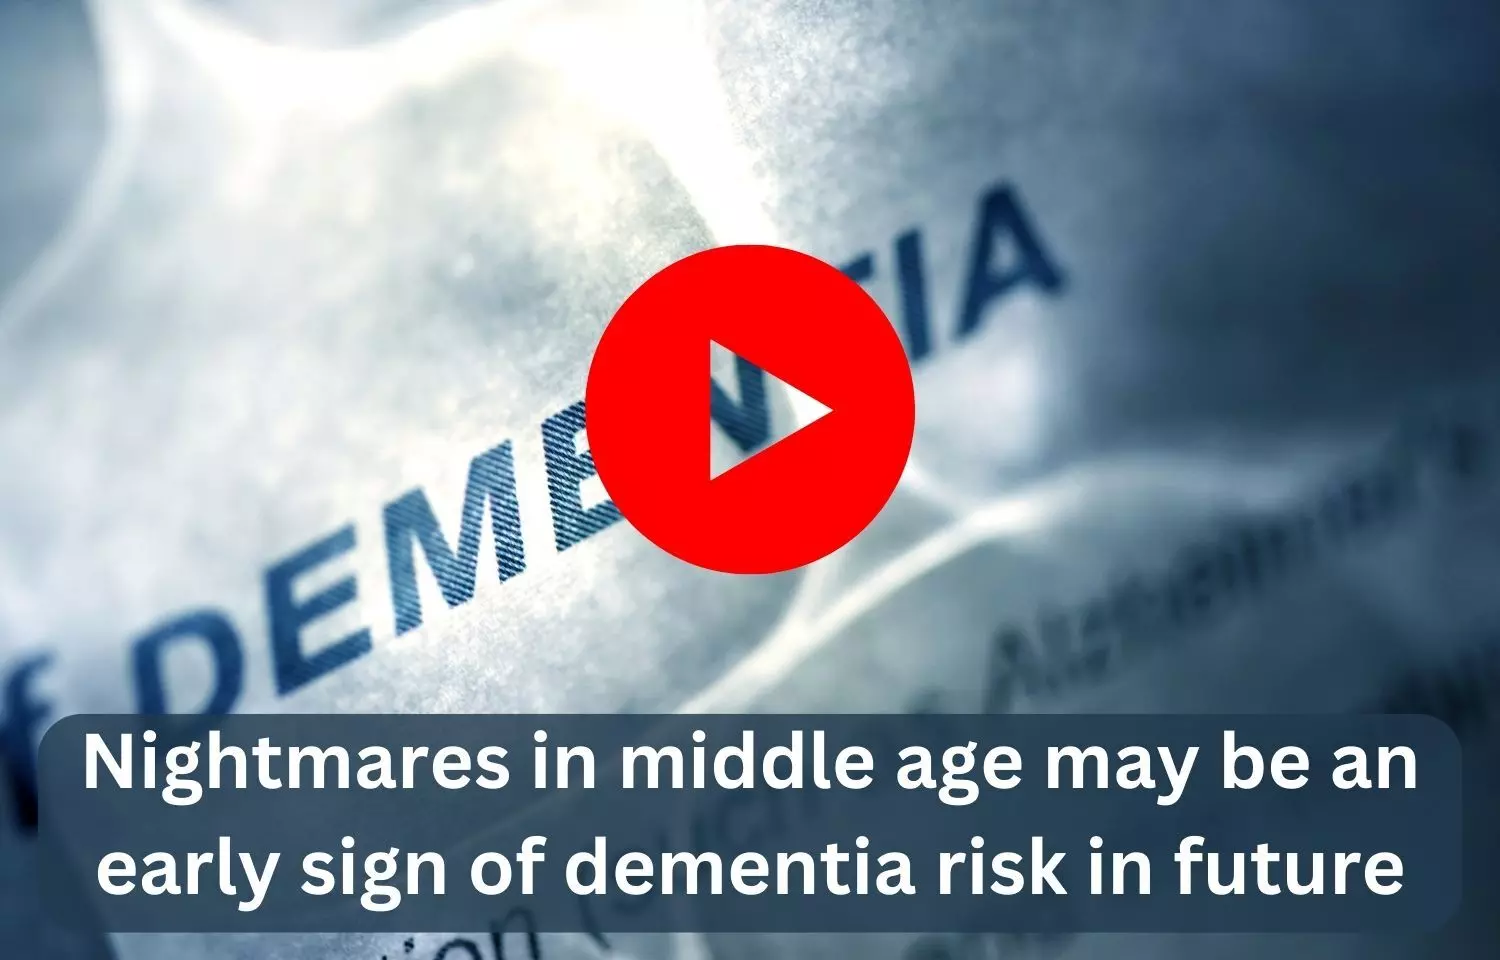 Nightmares in middle age may be an early sign of dementia risk in future